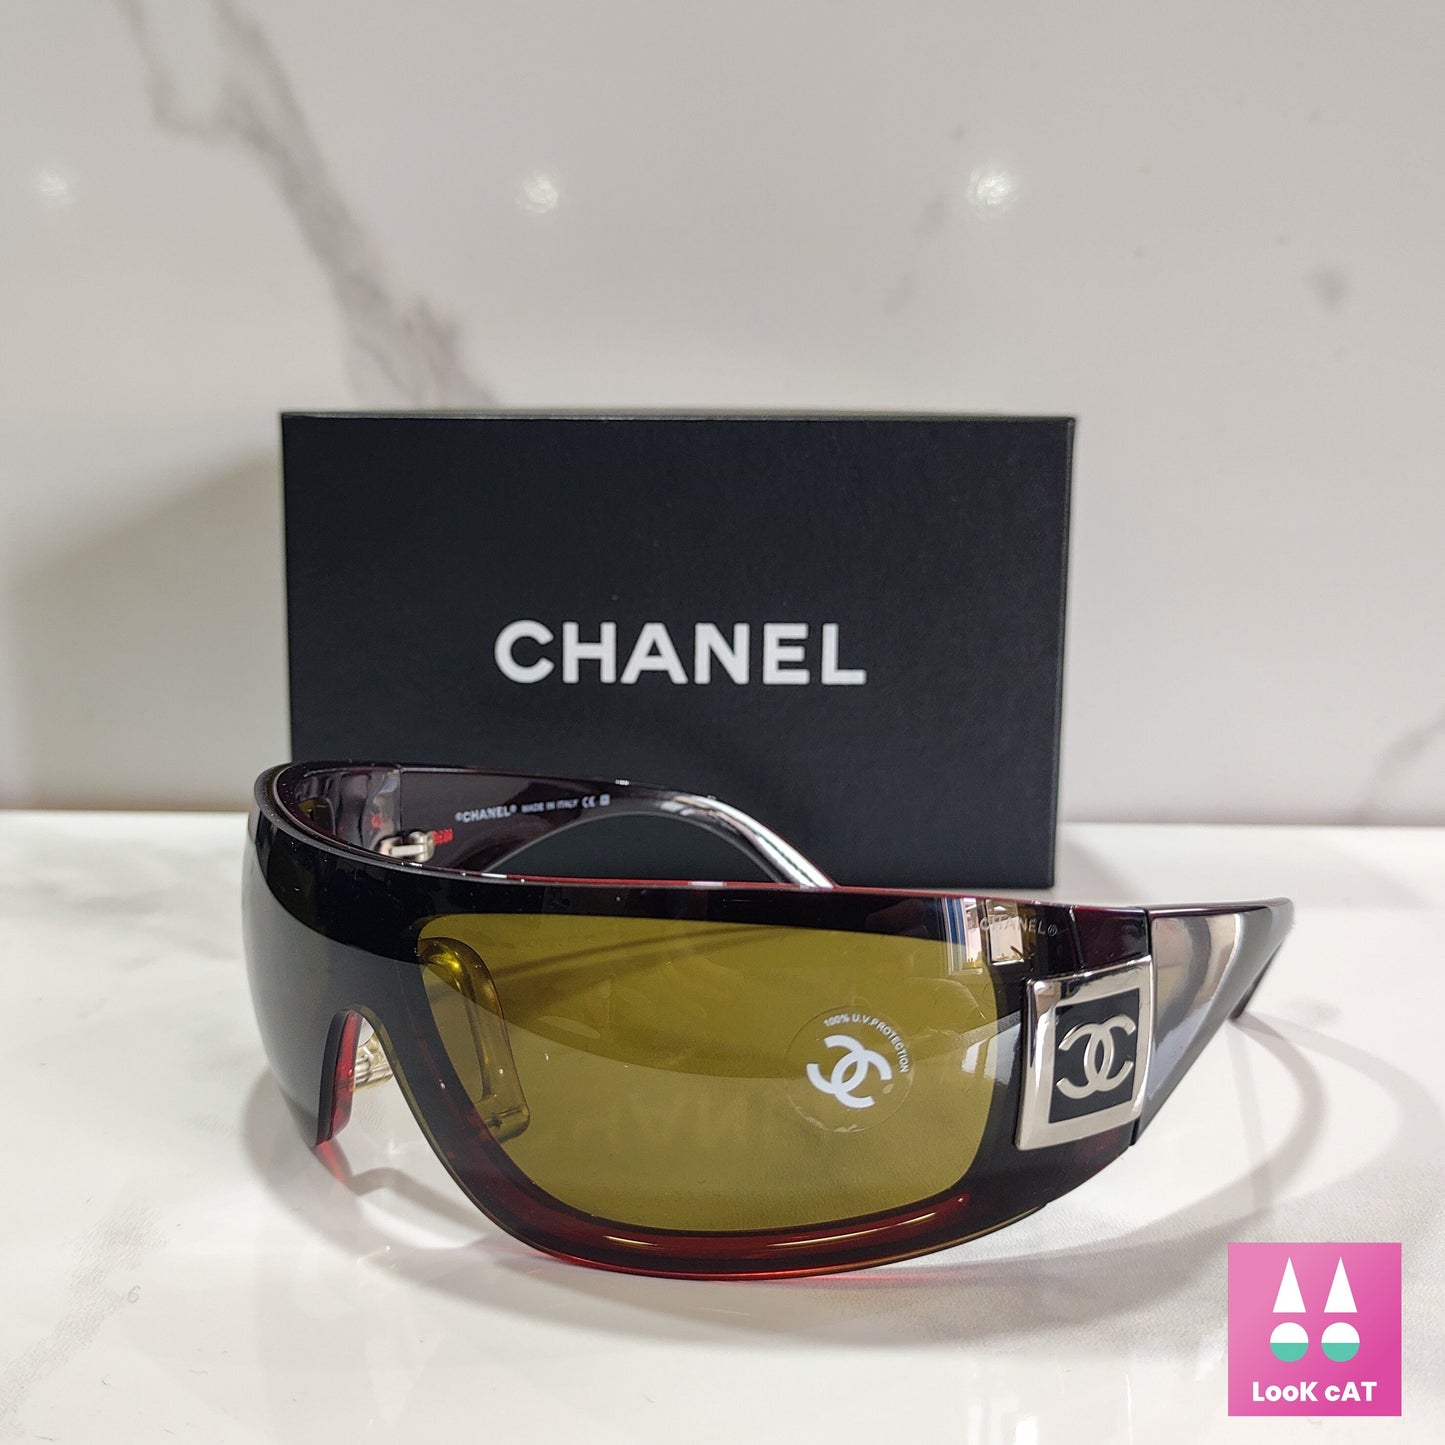 Chanel model 5085 sunglasses NOS wrap shield lunette Never used